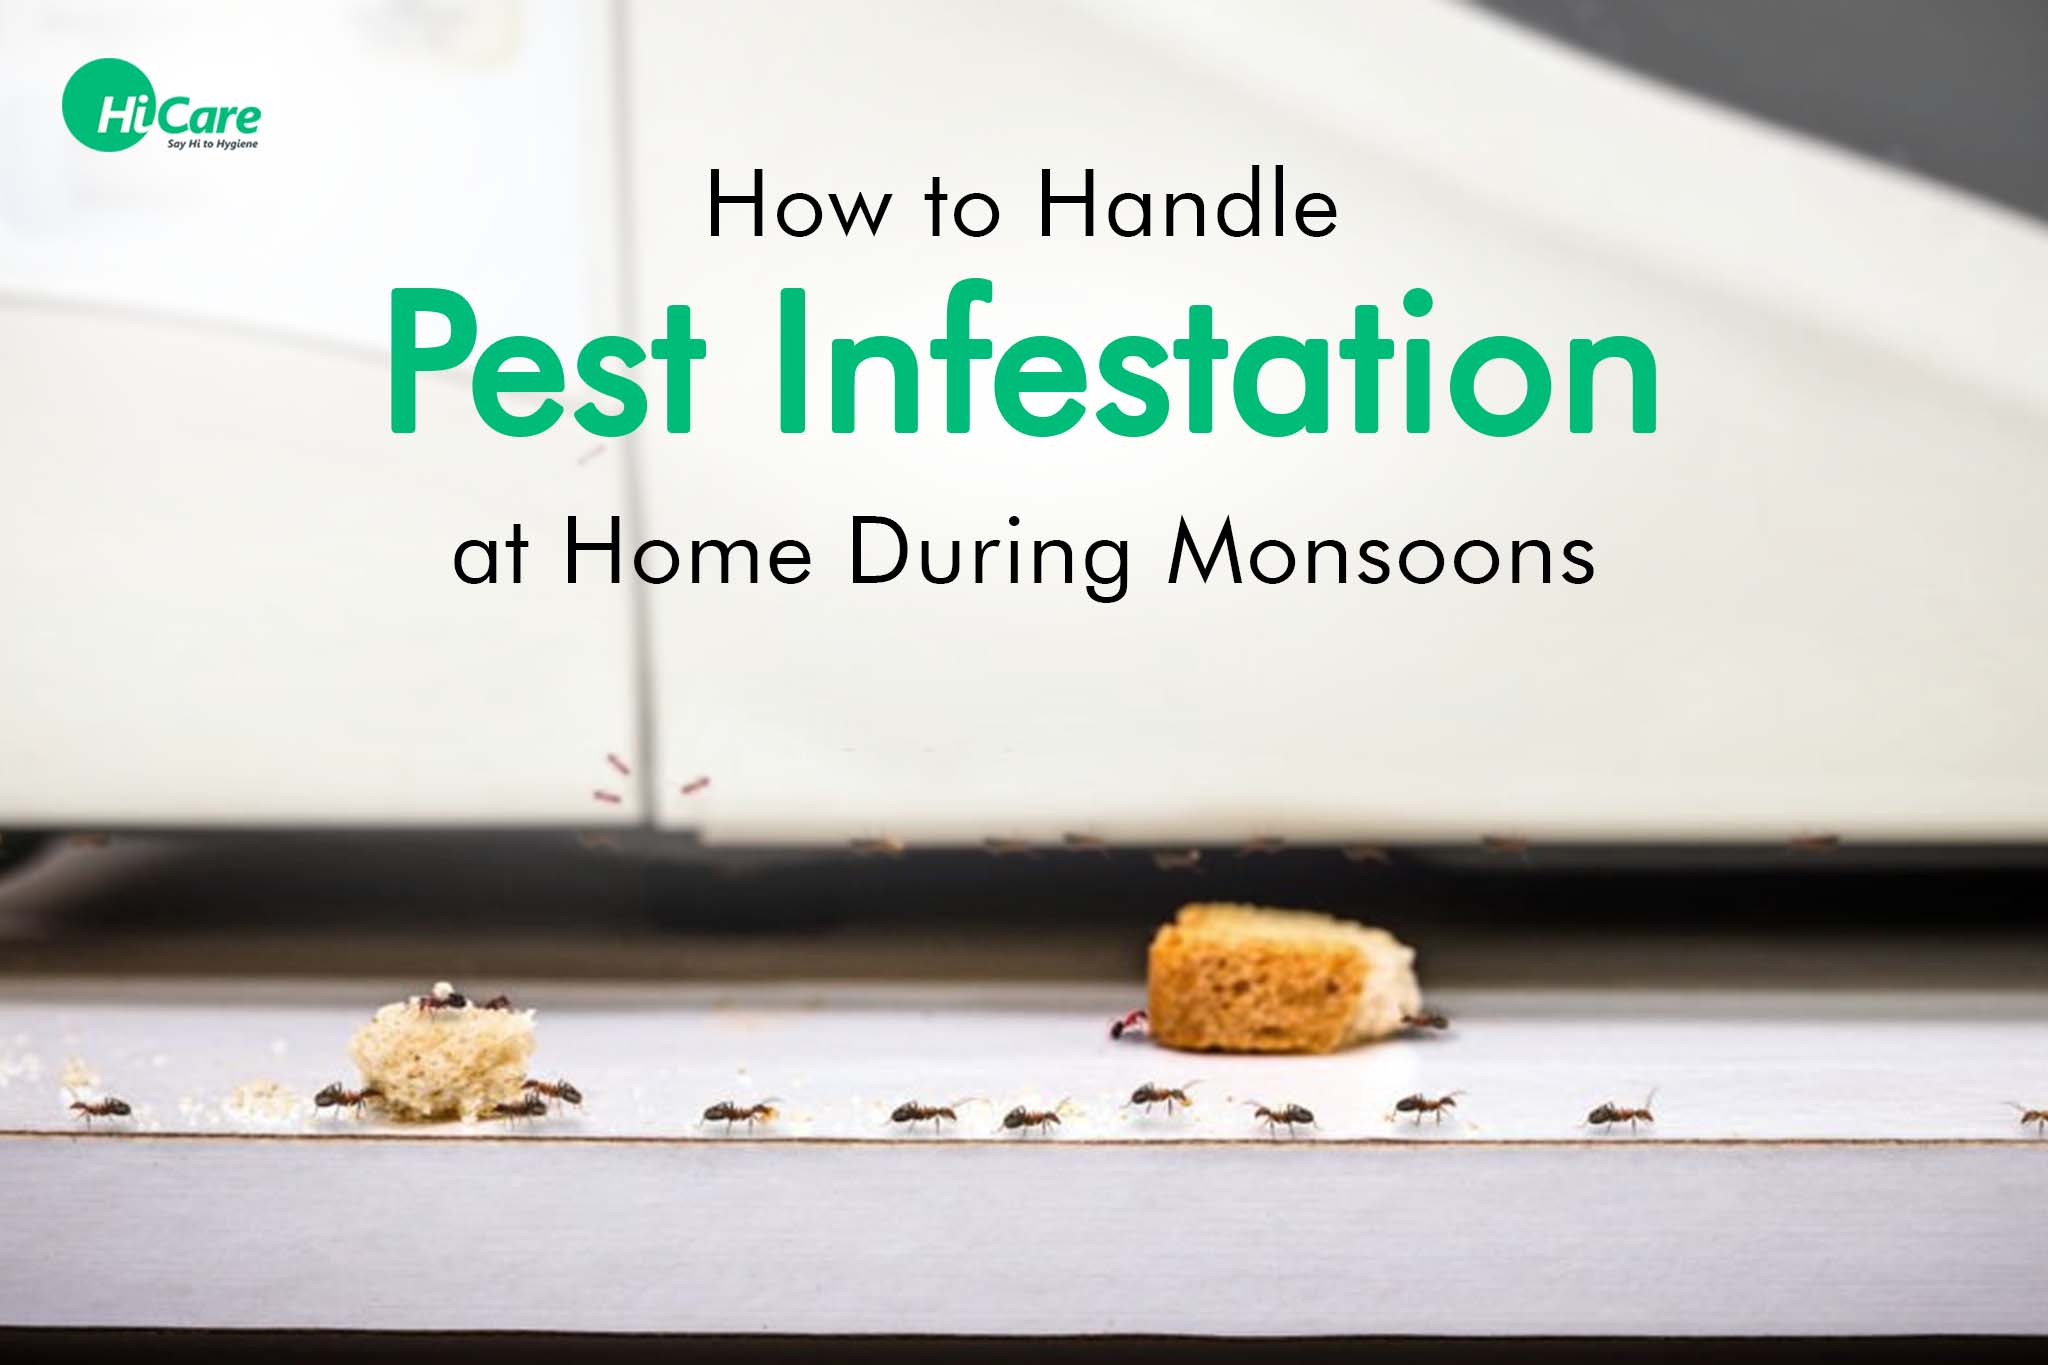 How to Handle Pest Infestation at Home During Monsoons?